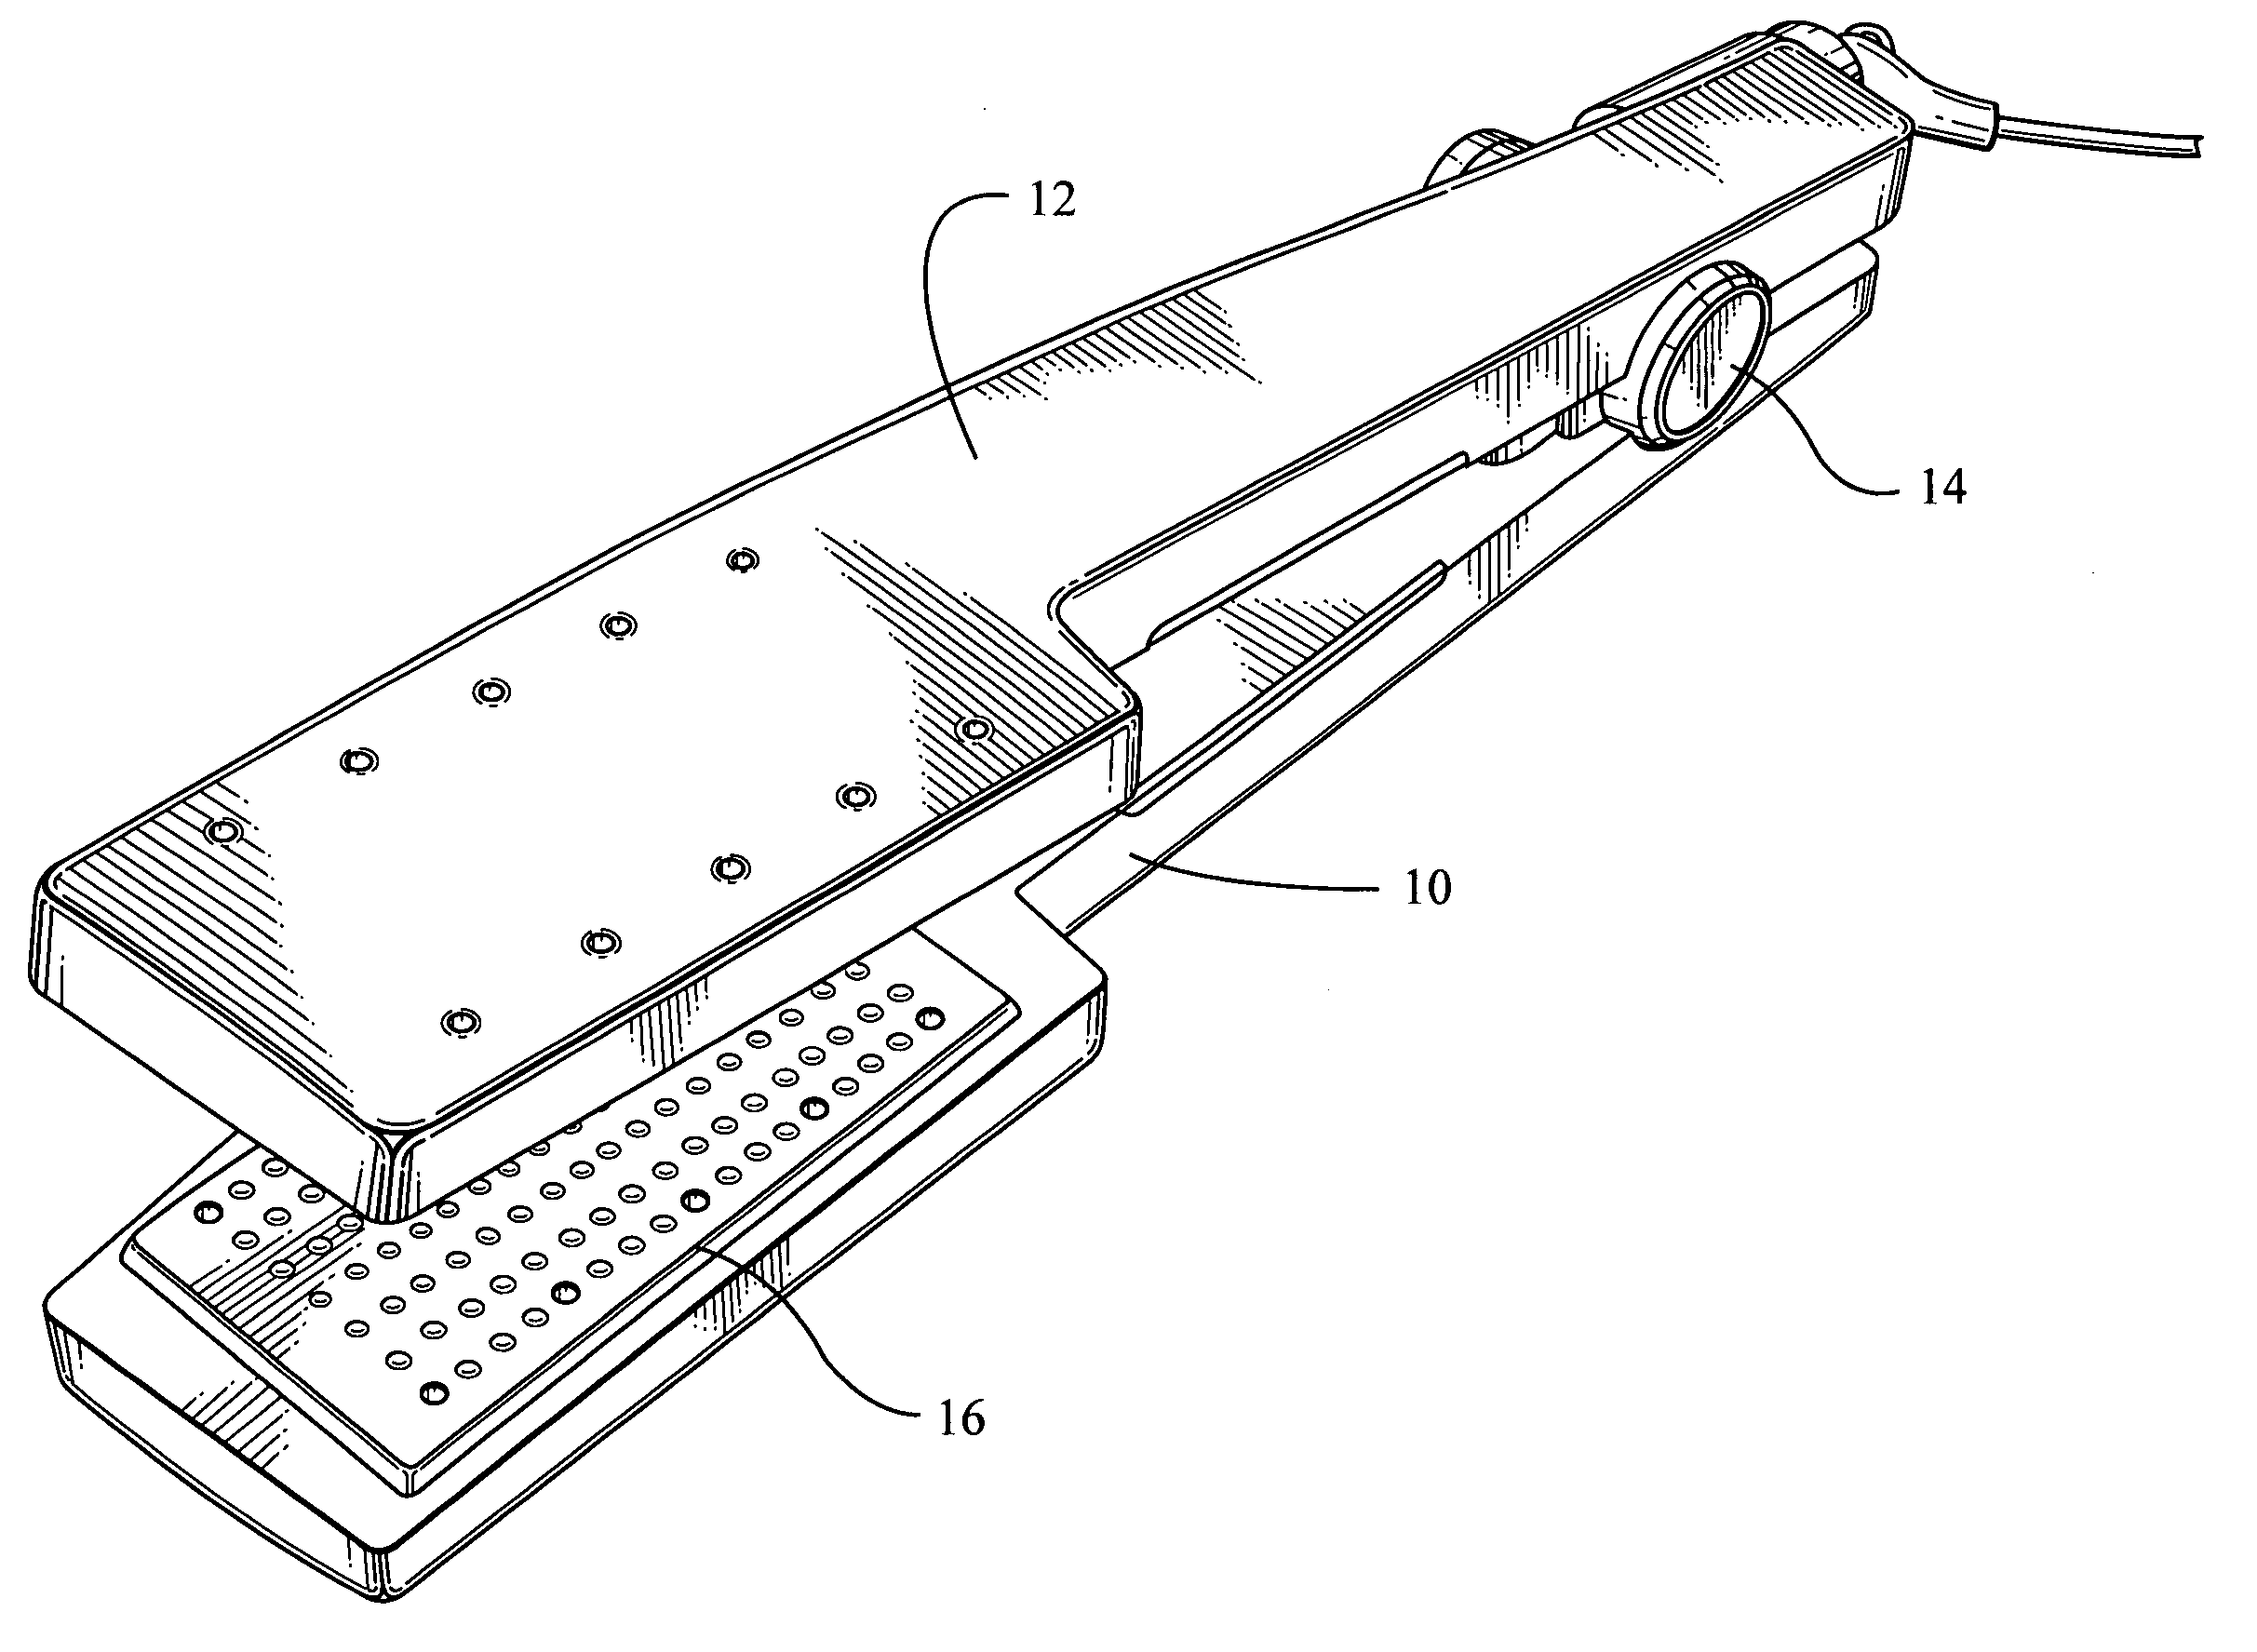 Hair iron with dimpled face plates and method of use in styling hair